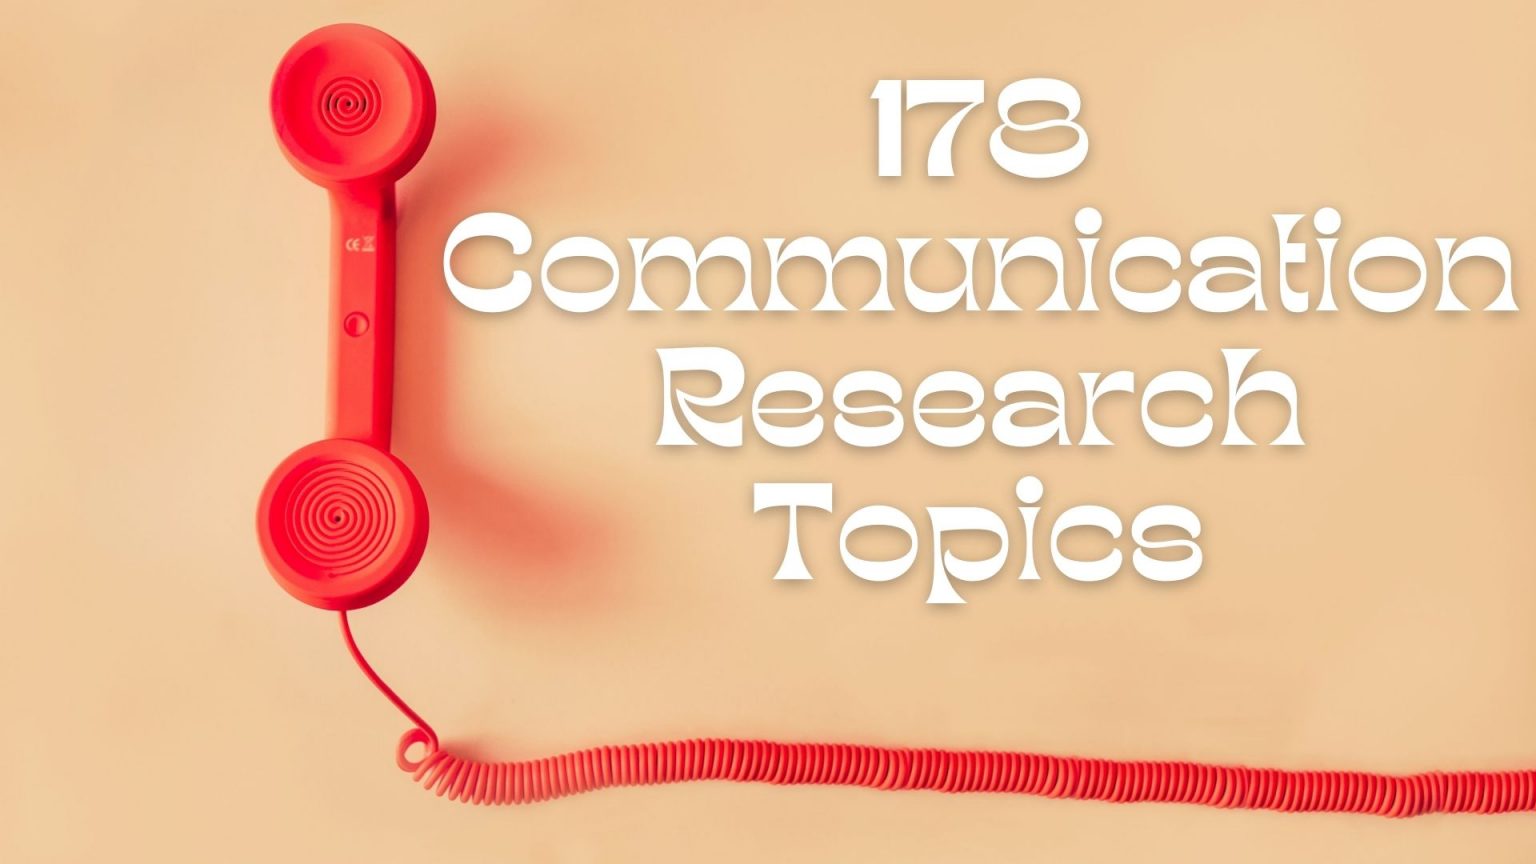 research topics related to communication